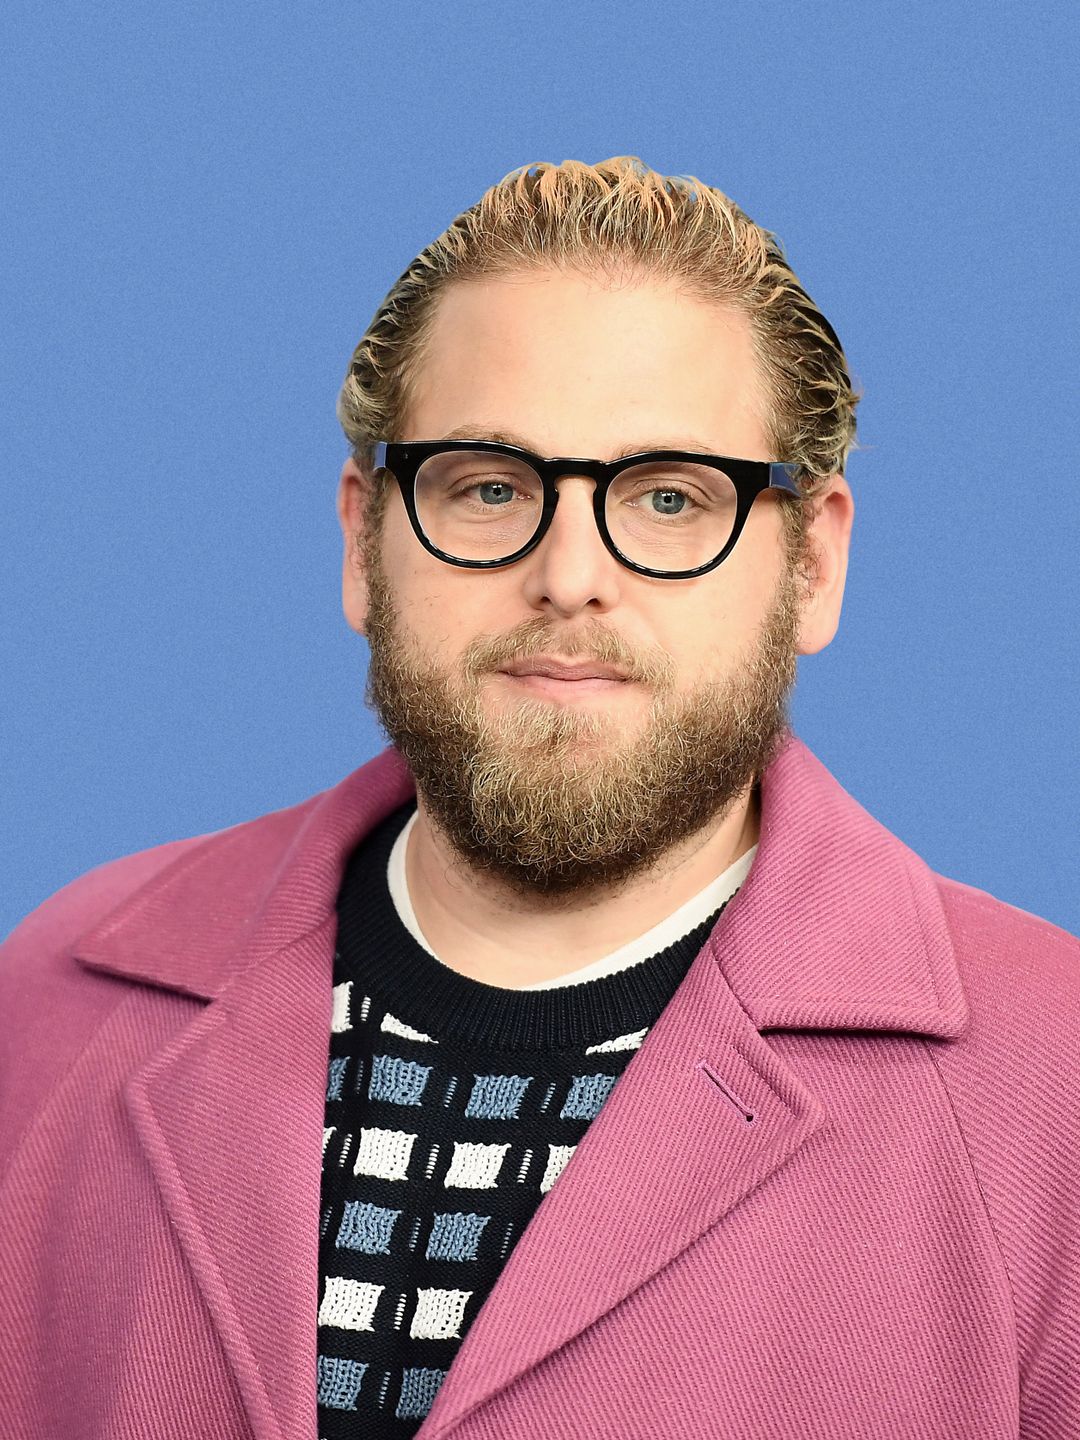 Jonah Hill place of birth